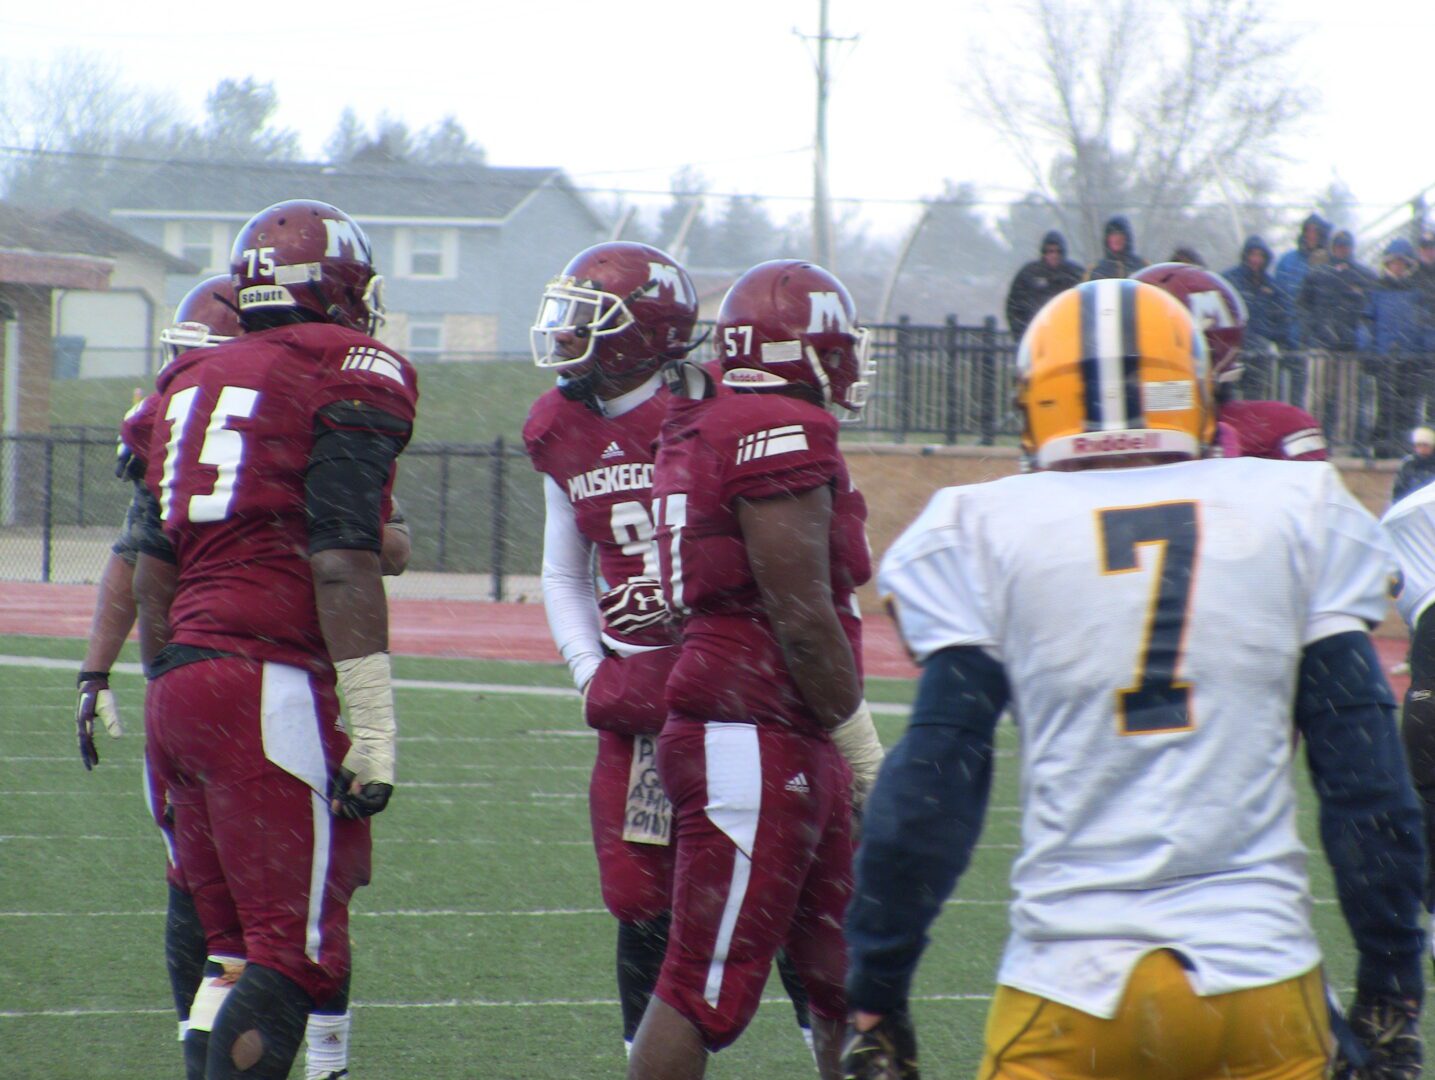 Highlights from Muskegon’s semifinal win over Portage Central, ticket sales for state finals announced [VIDEO]